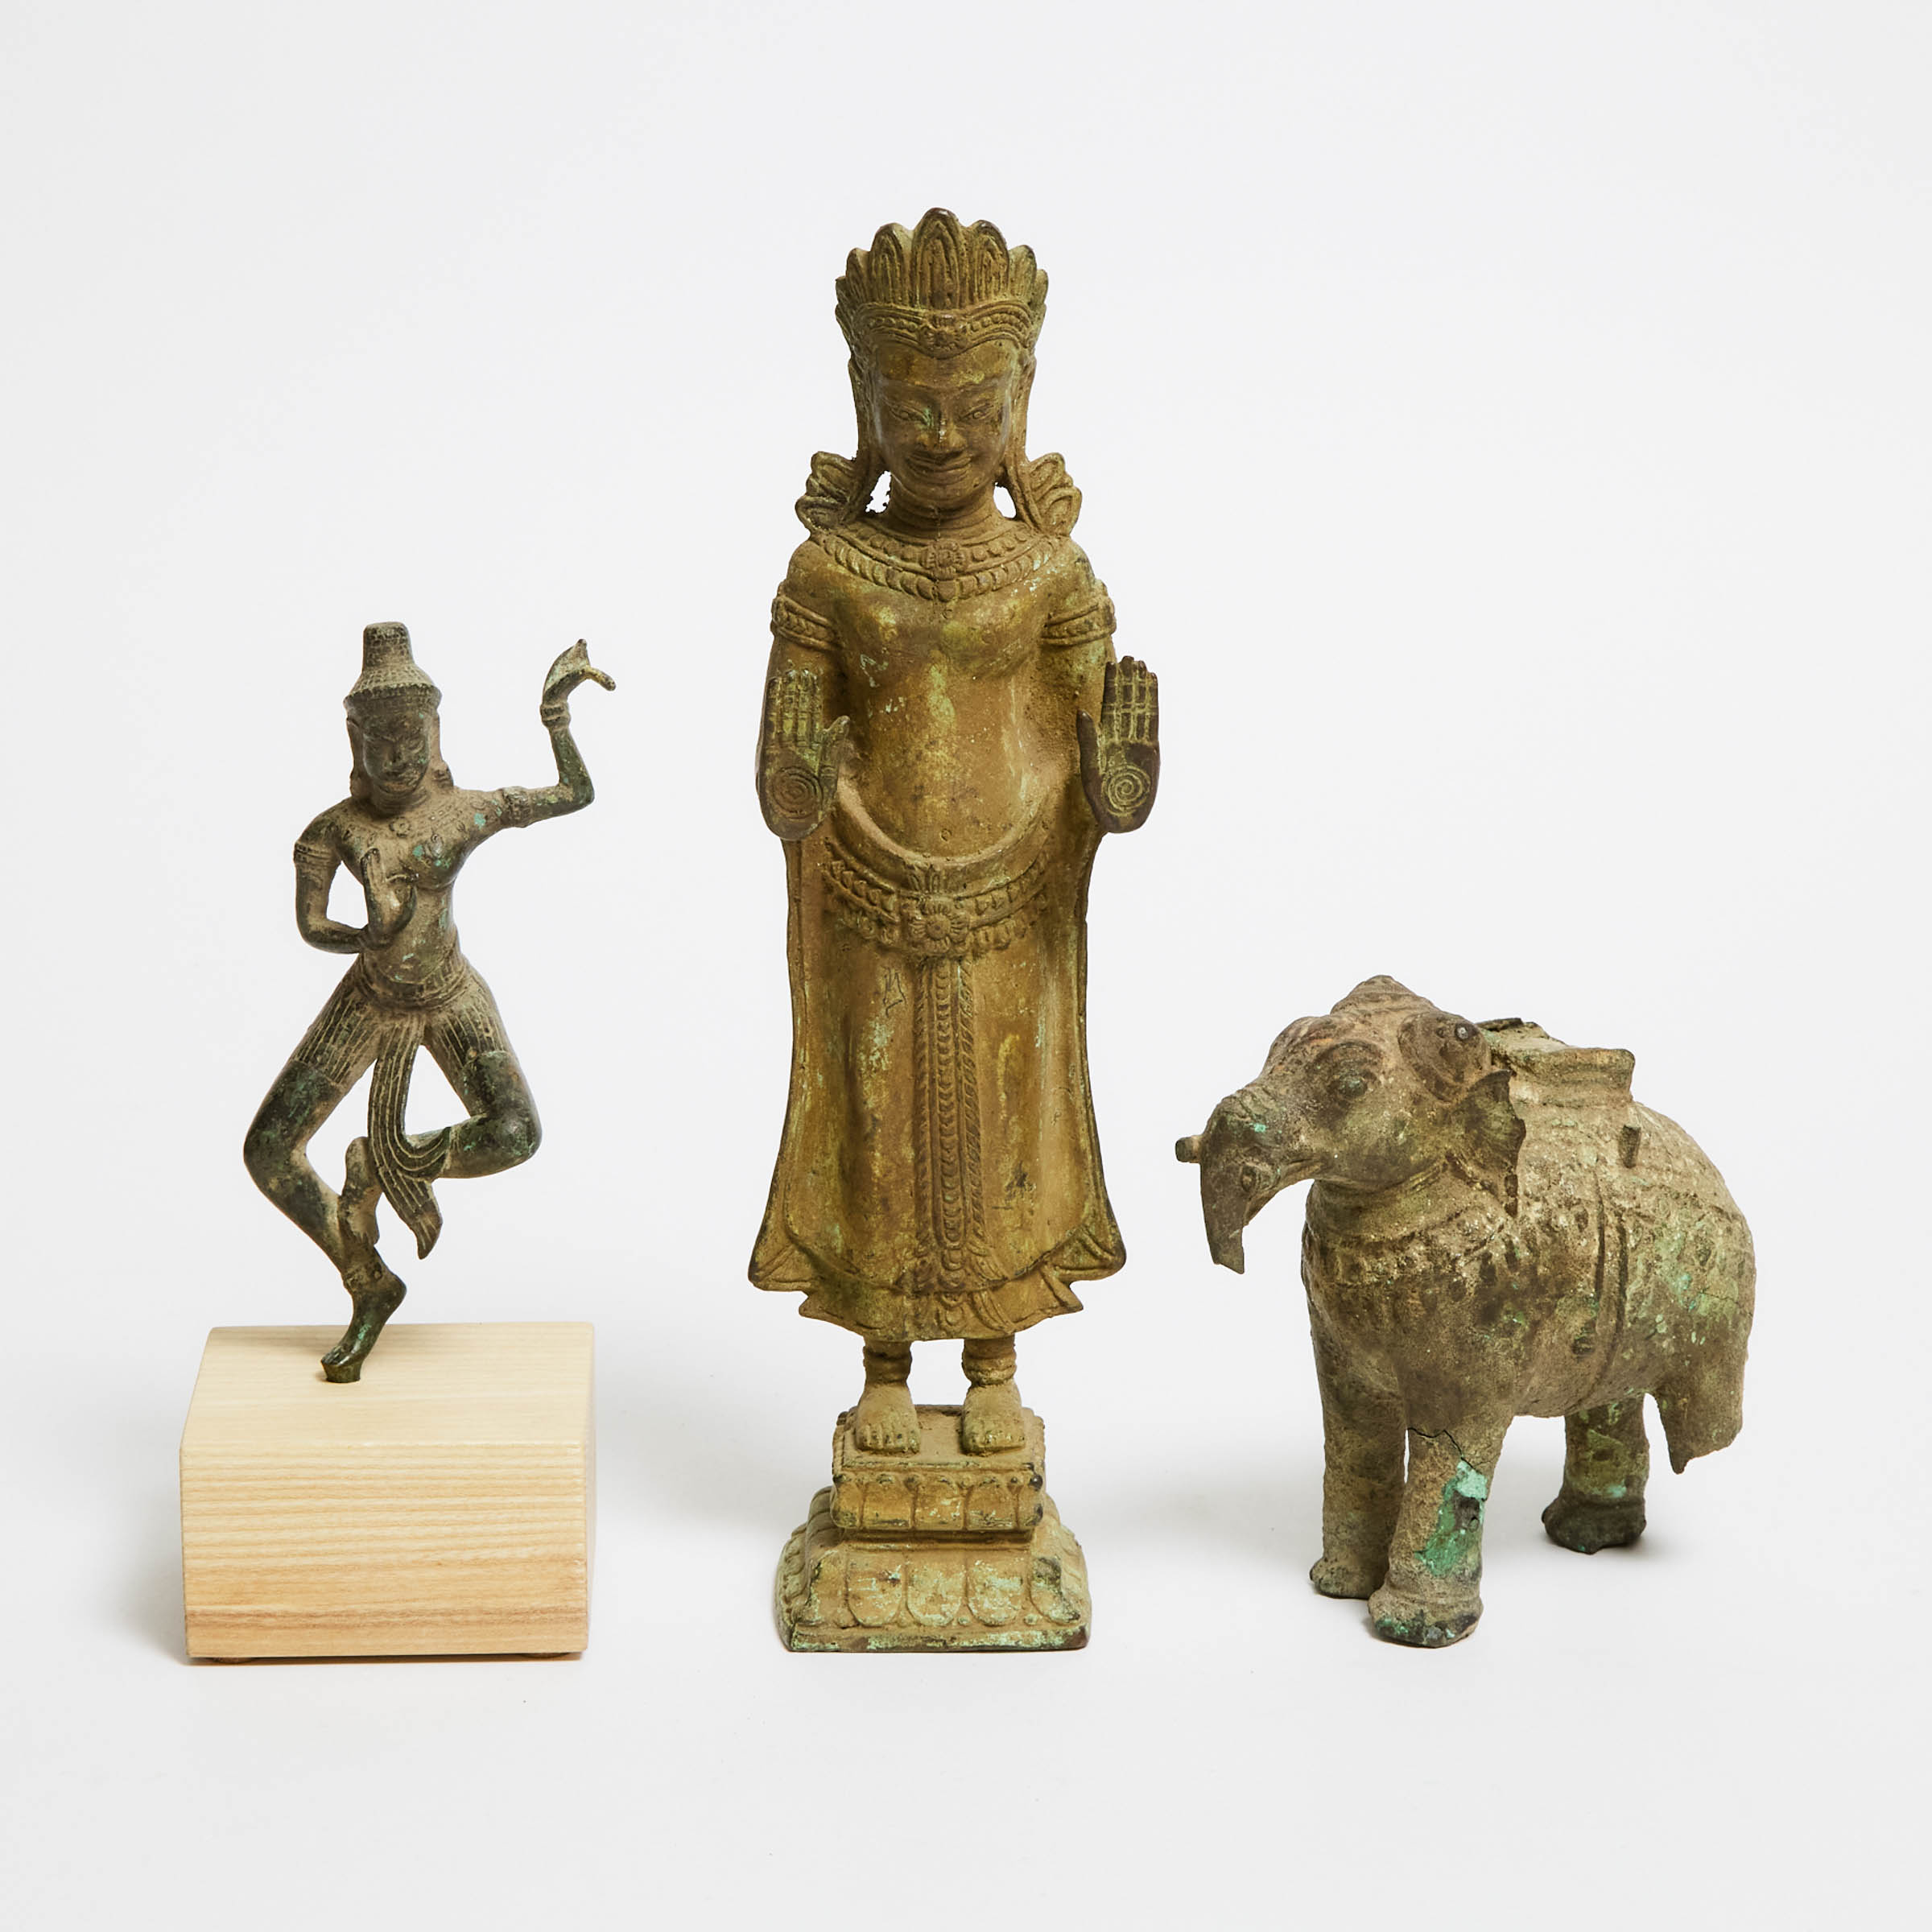 A Group of Three Khmer Bronze Goddesses and Elephant, 12th Century or Later